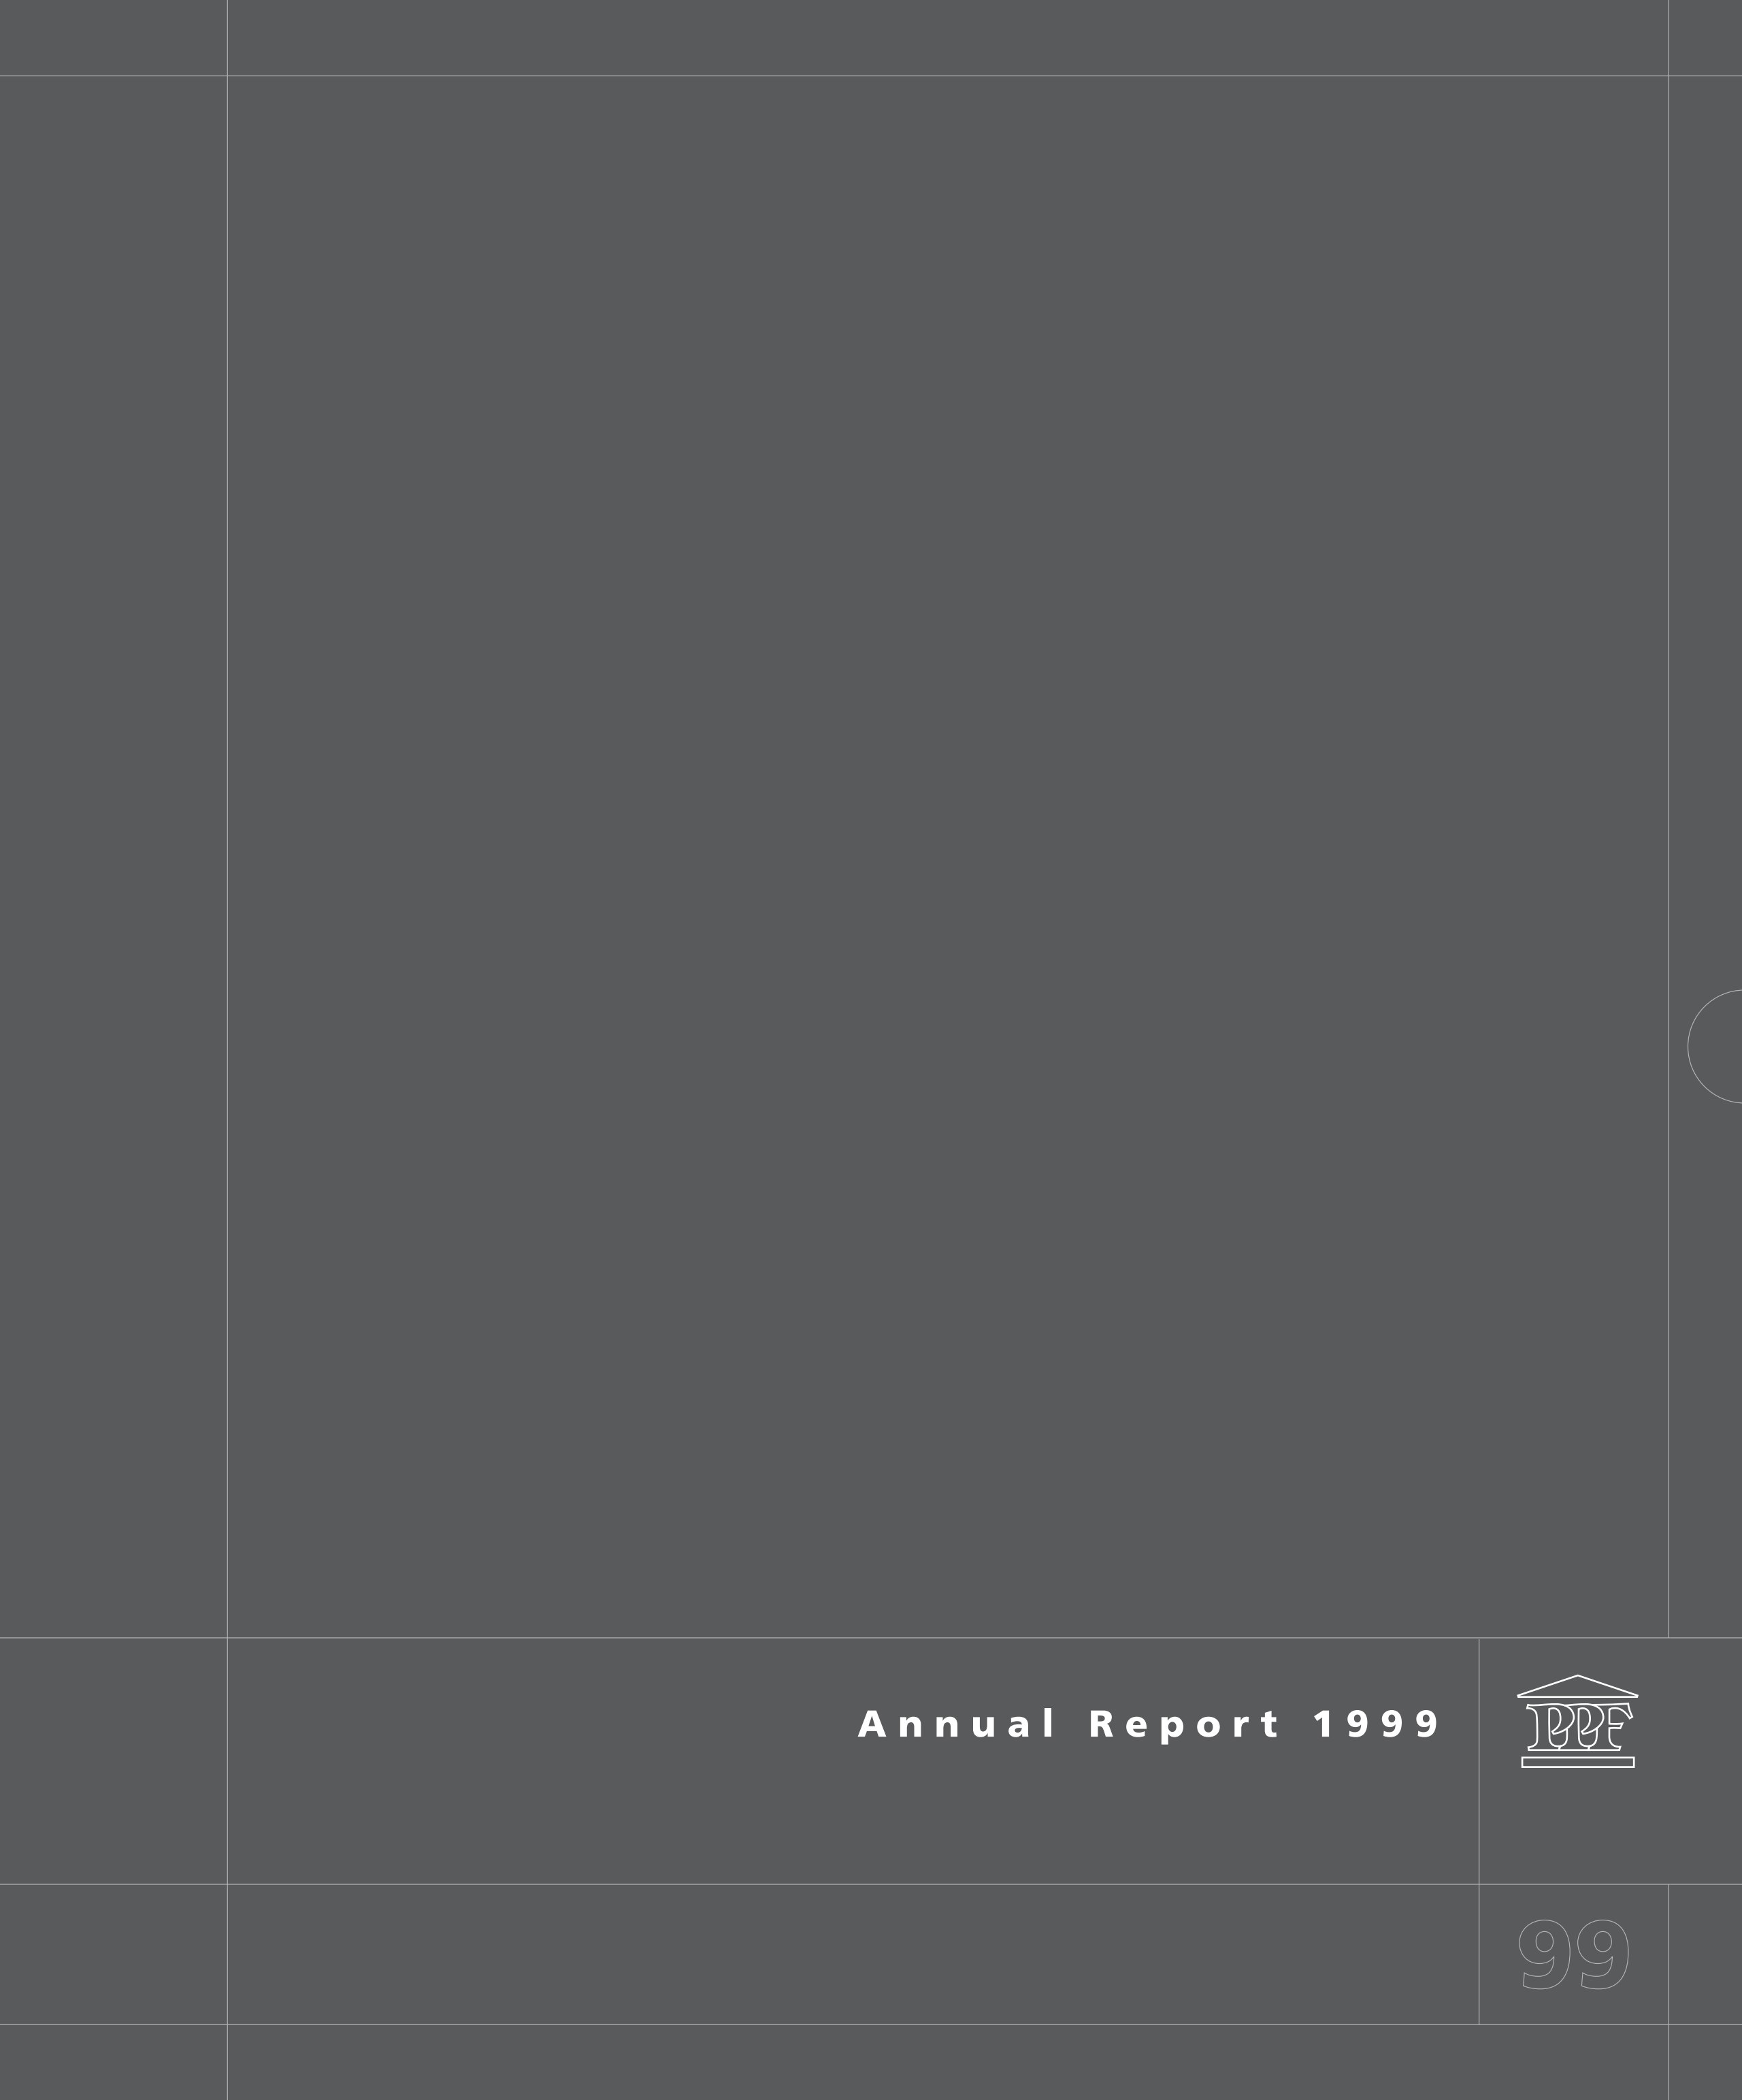 PPF Group Annual Report 1999